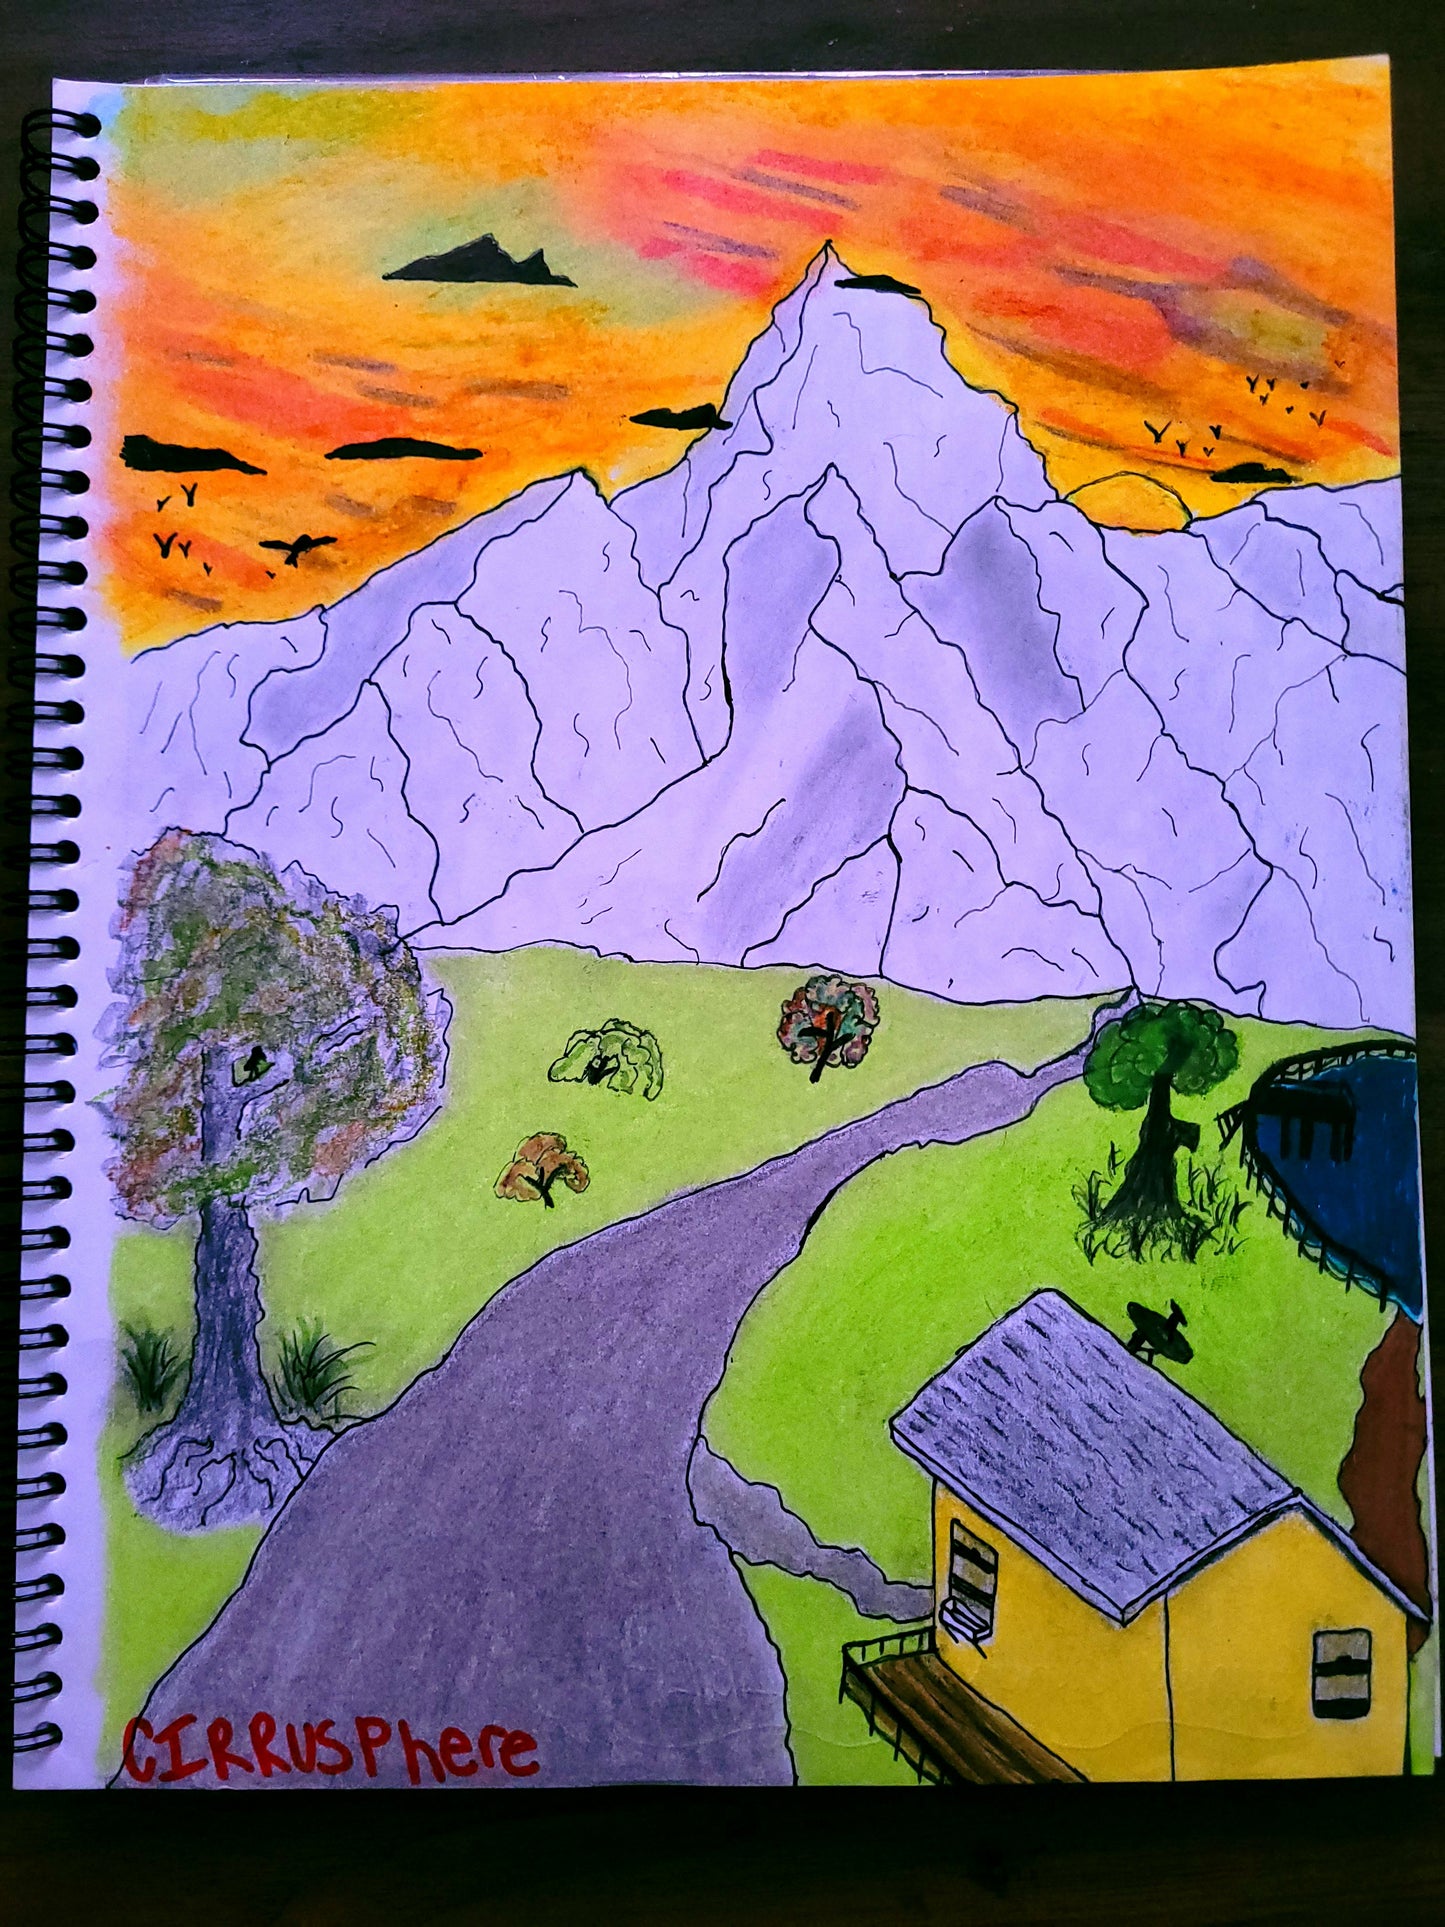 "Happy Mornings" A hand drawn landscape by CIrrusphere